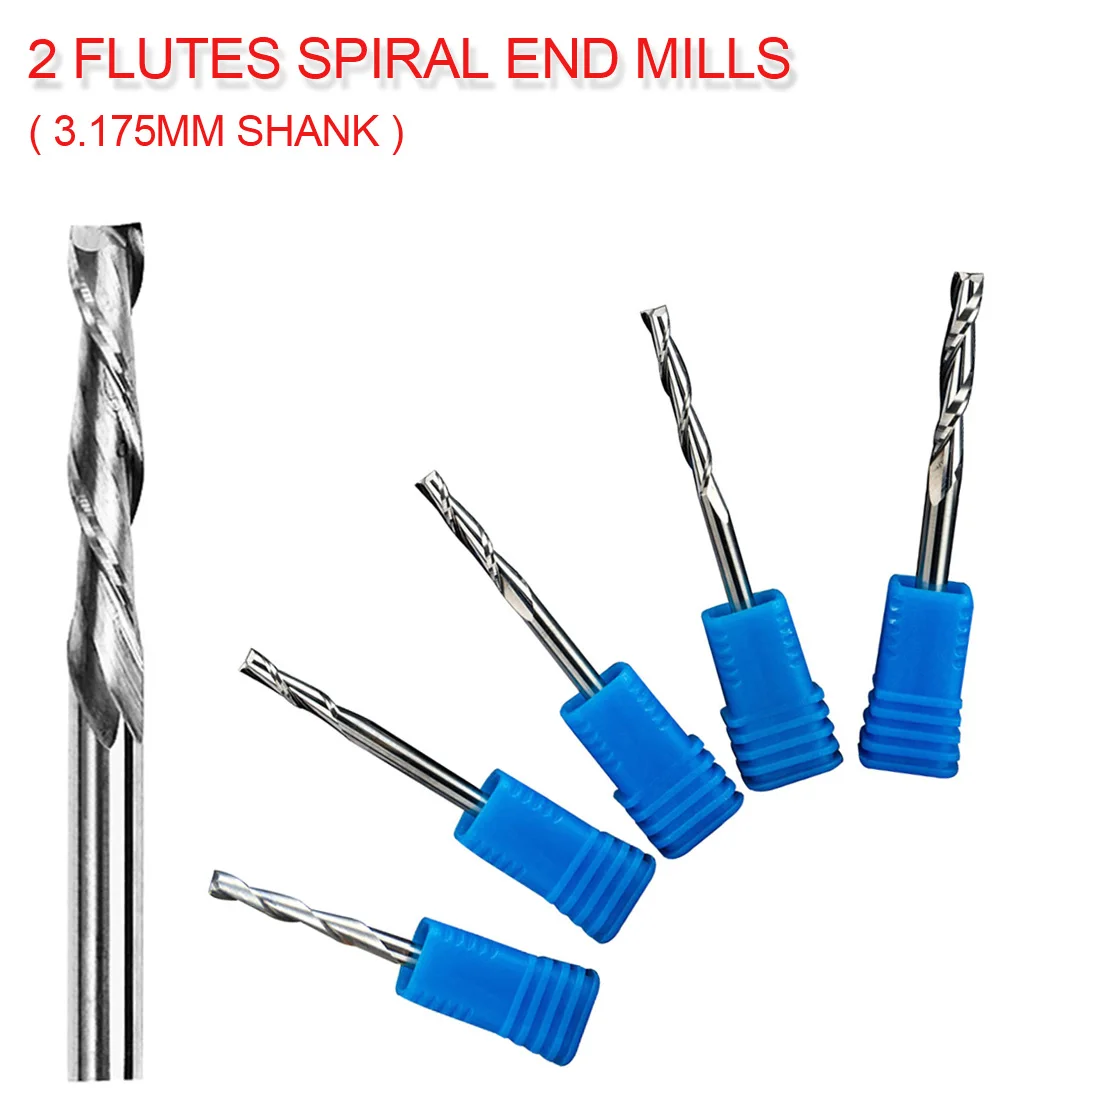 

3.175mm Shank CNC Router Bits 2 Flutes Spiral End Mills Double Flute Milling Cutter Spiral For Acrylic/PVC/Aluminum/Copper/Wood